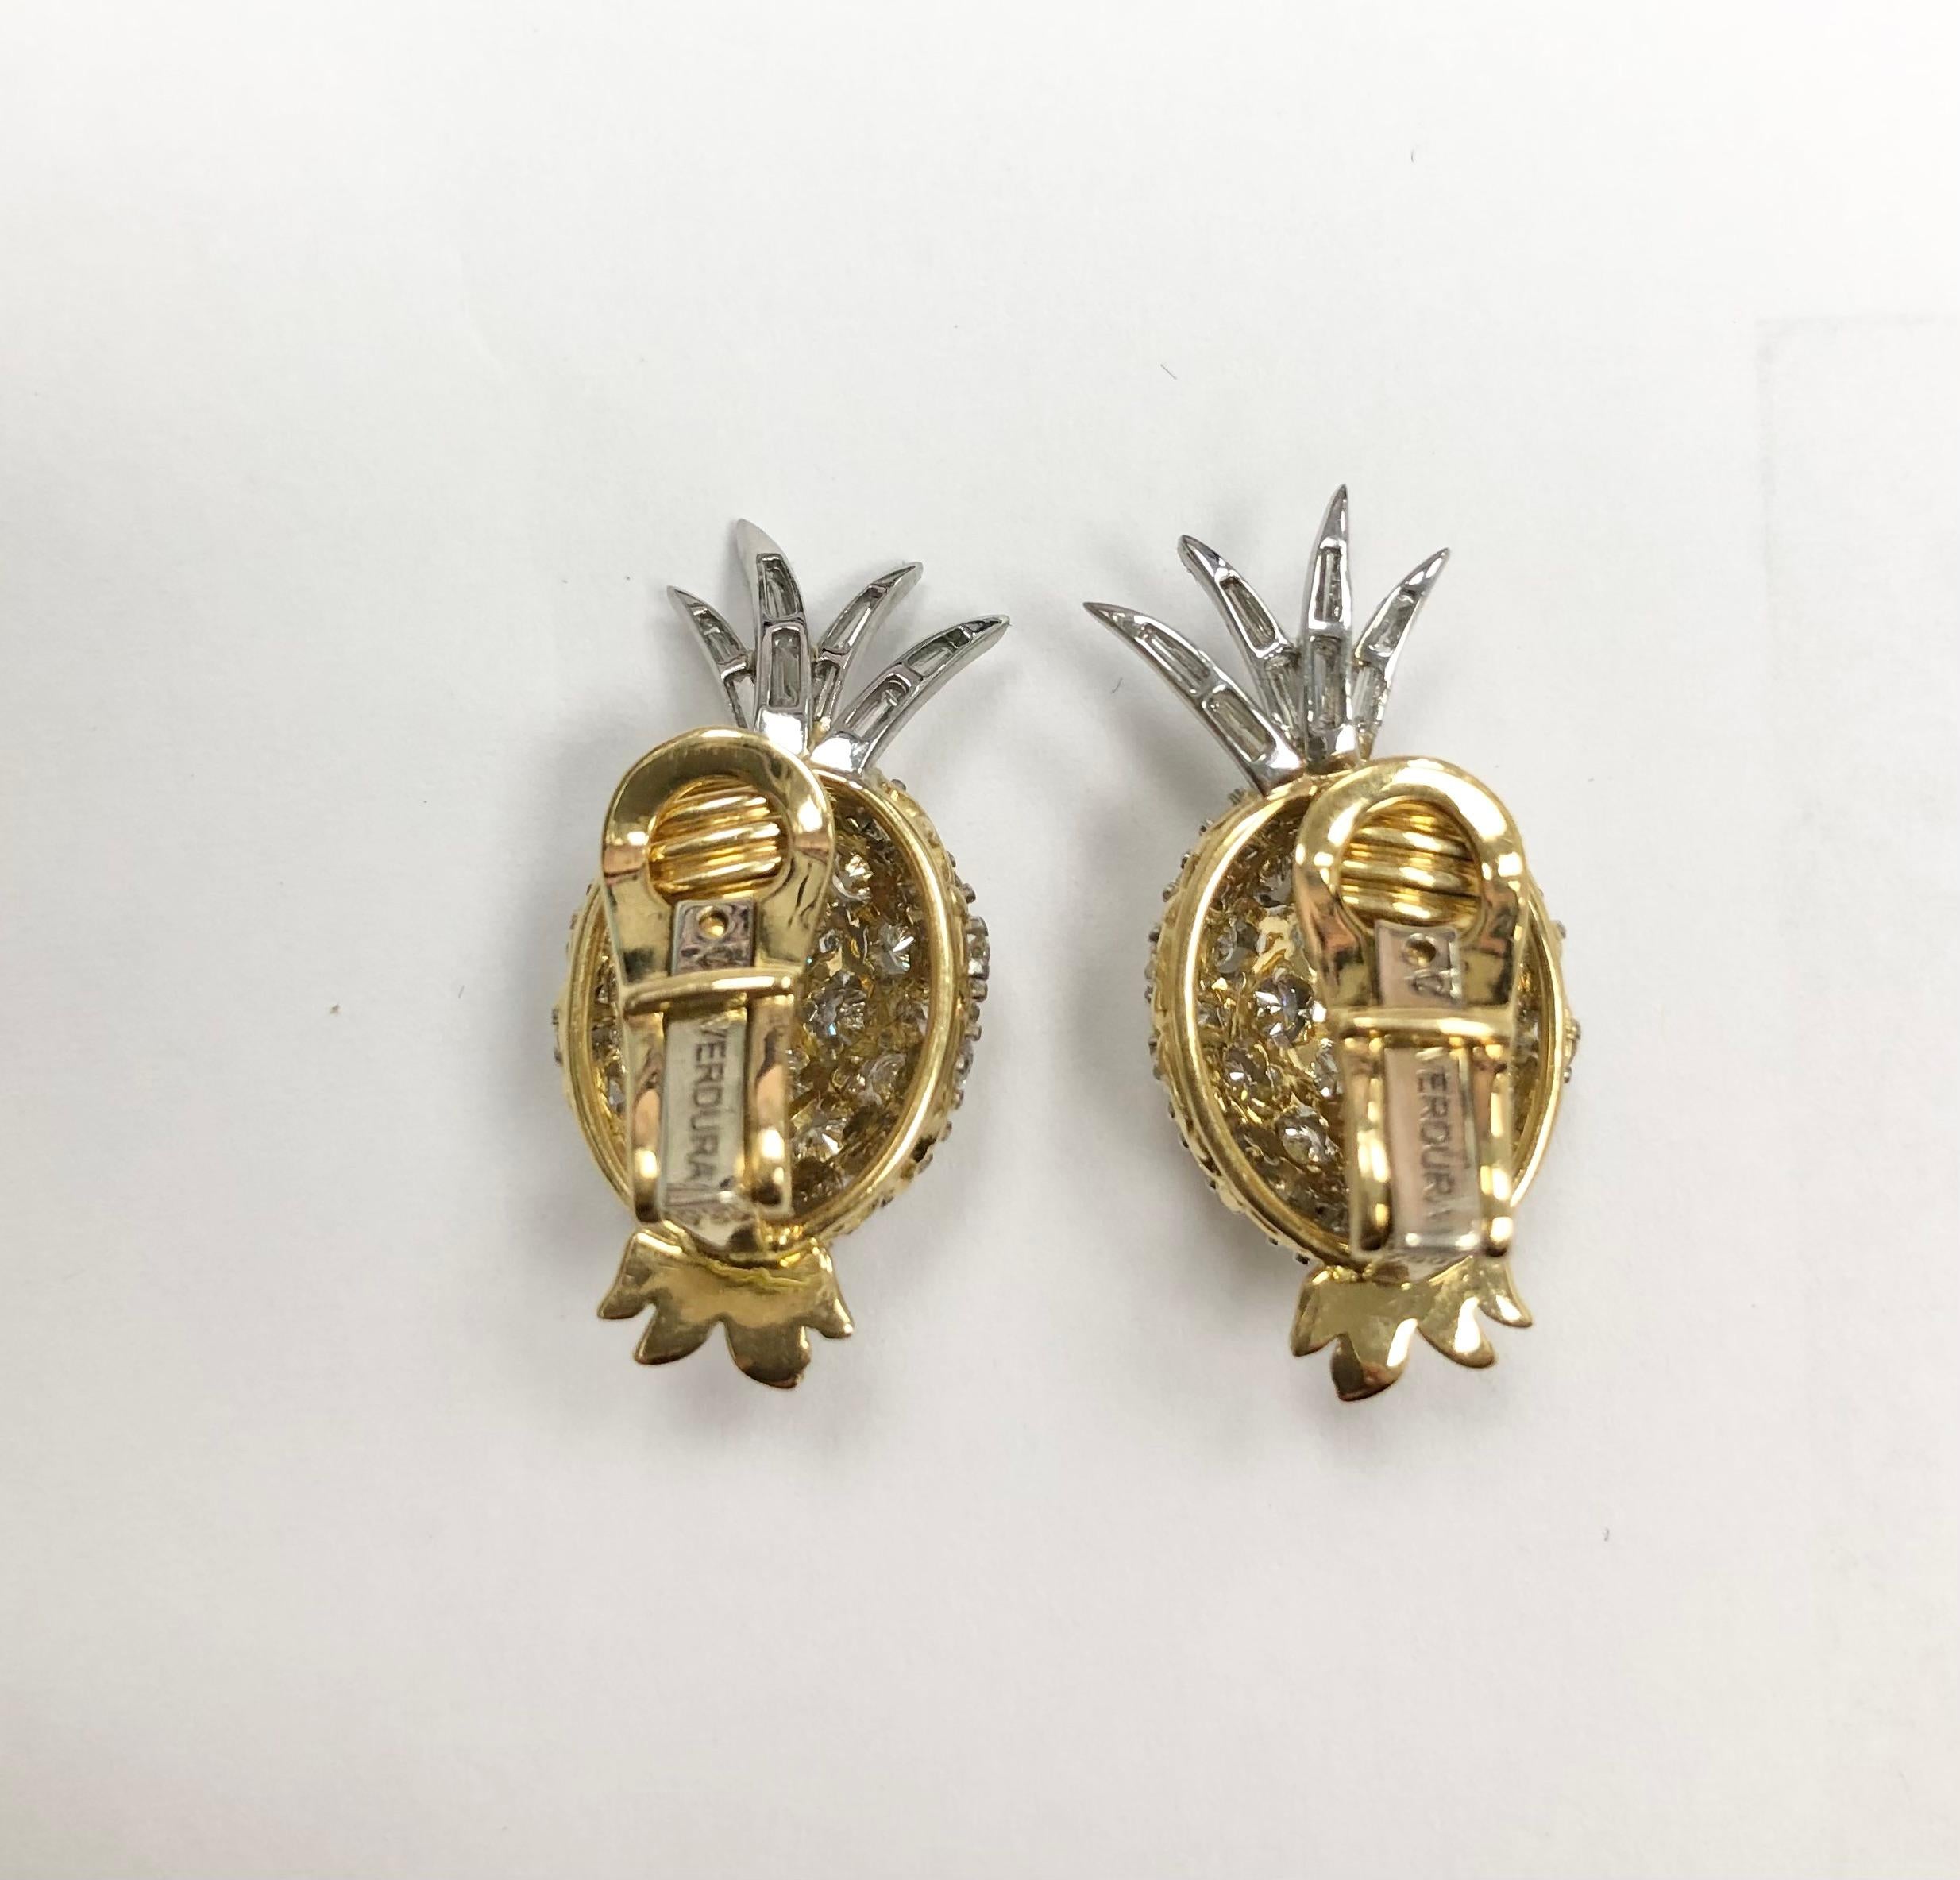 18K yellow gold and platinum diamond pineapple clip-on earrings. Set with 60 round diamonds approx 2.50 cts and 16 baguette diamonds approx 0.50ct, approx E color and VS clarity.
Measurment : appox 26.6 mm x 12.8 mm
Weight: 11.0 g
